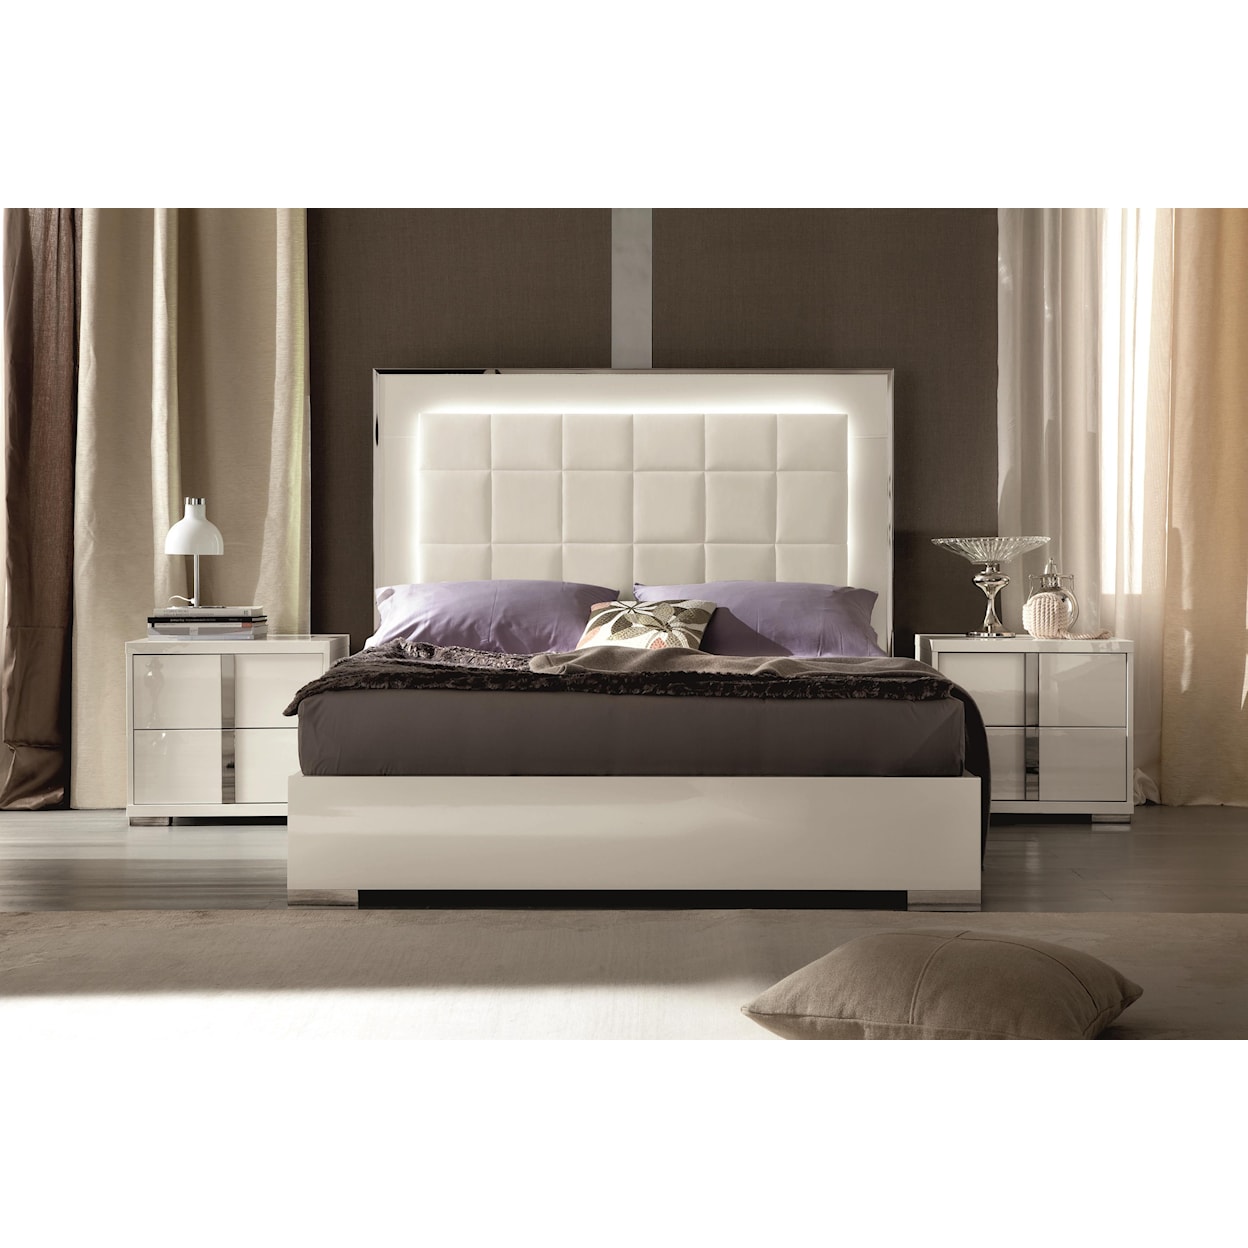 Alf Italia Imperia Queen Upholstered Bed with LED Lights